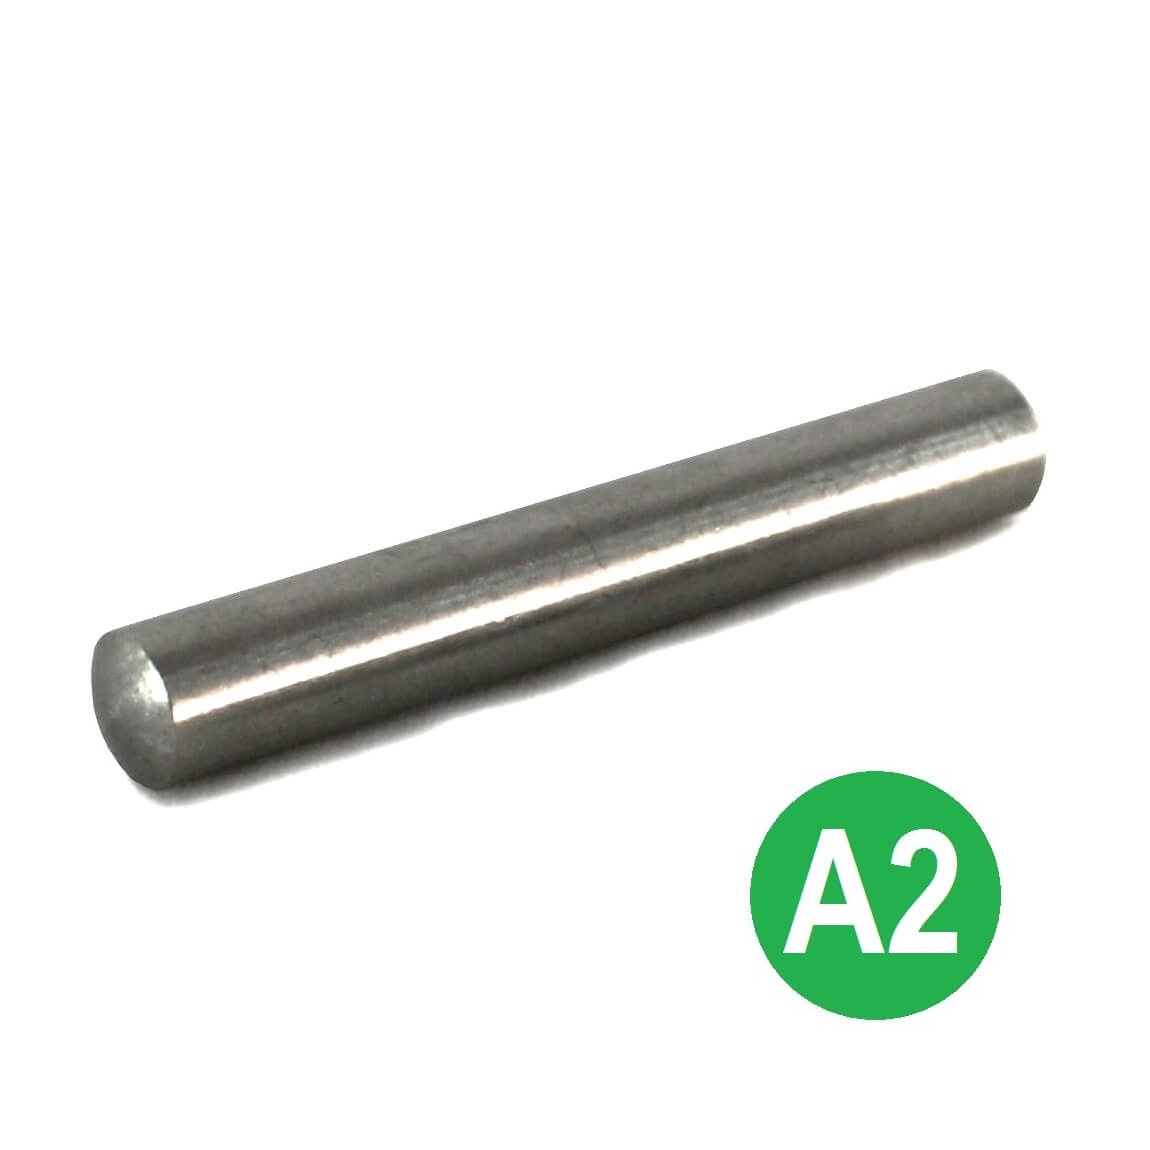 3mm Dia x 12mm A2 Stainless Dowel Pins DIN 7